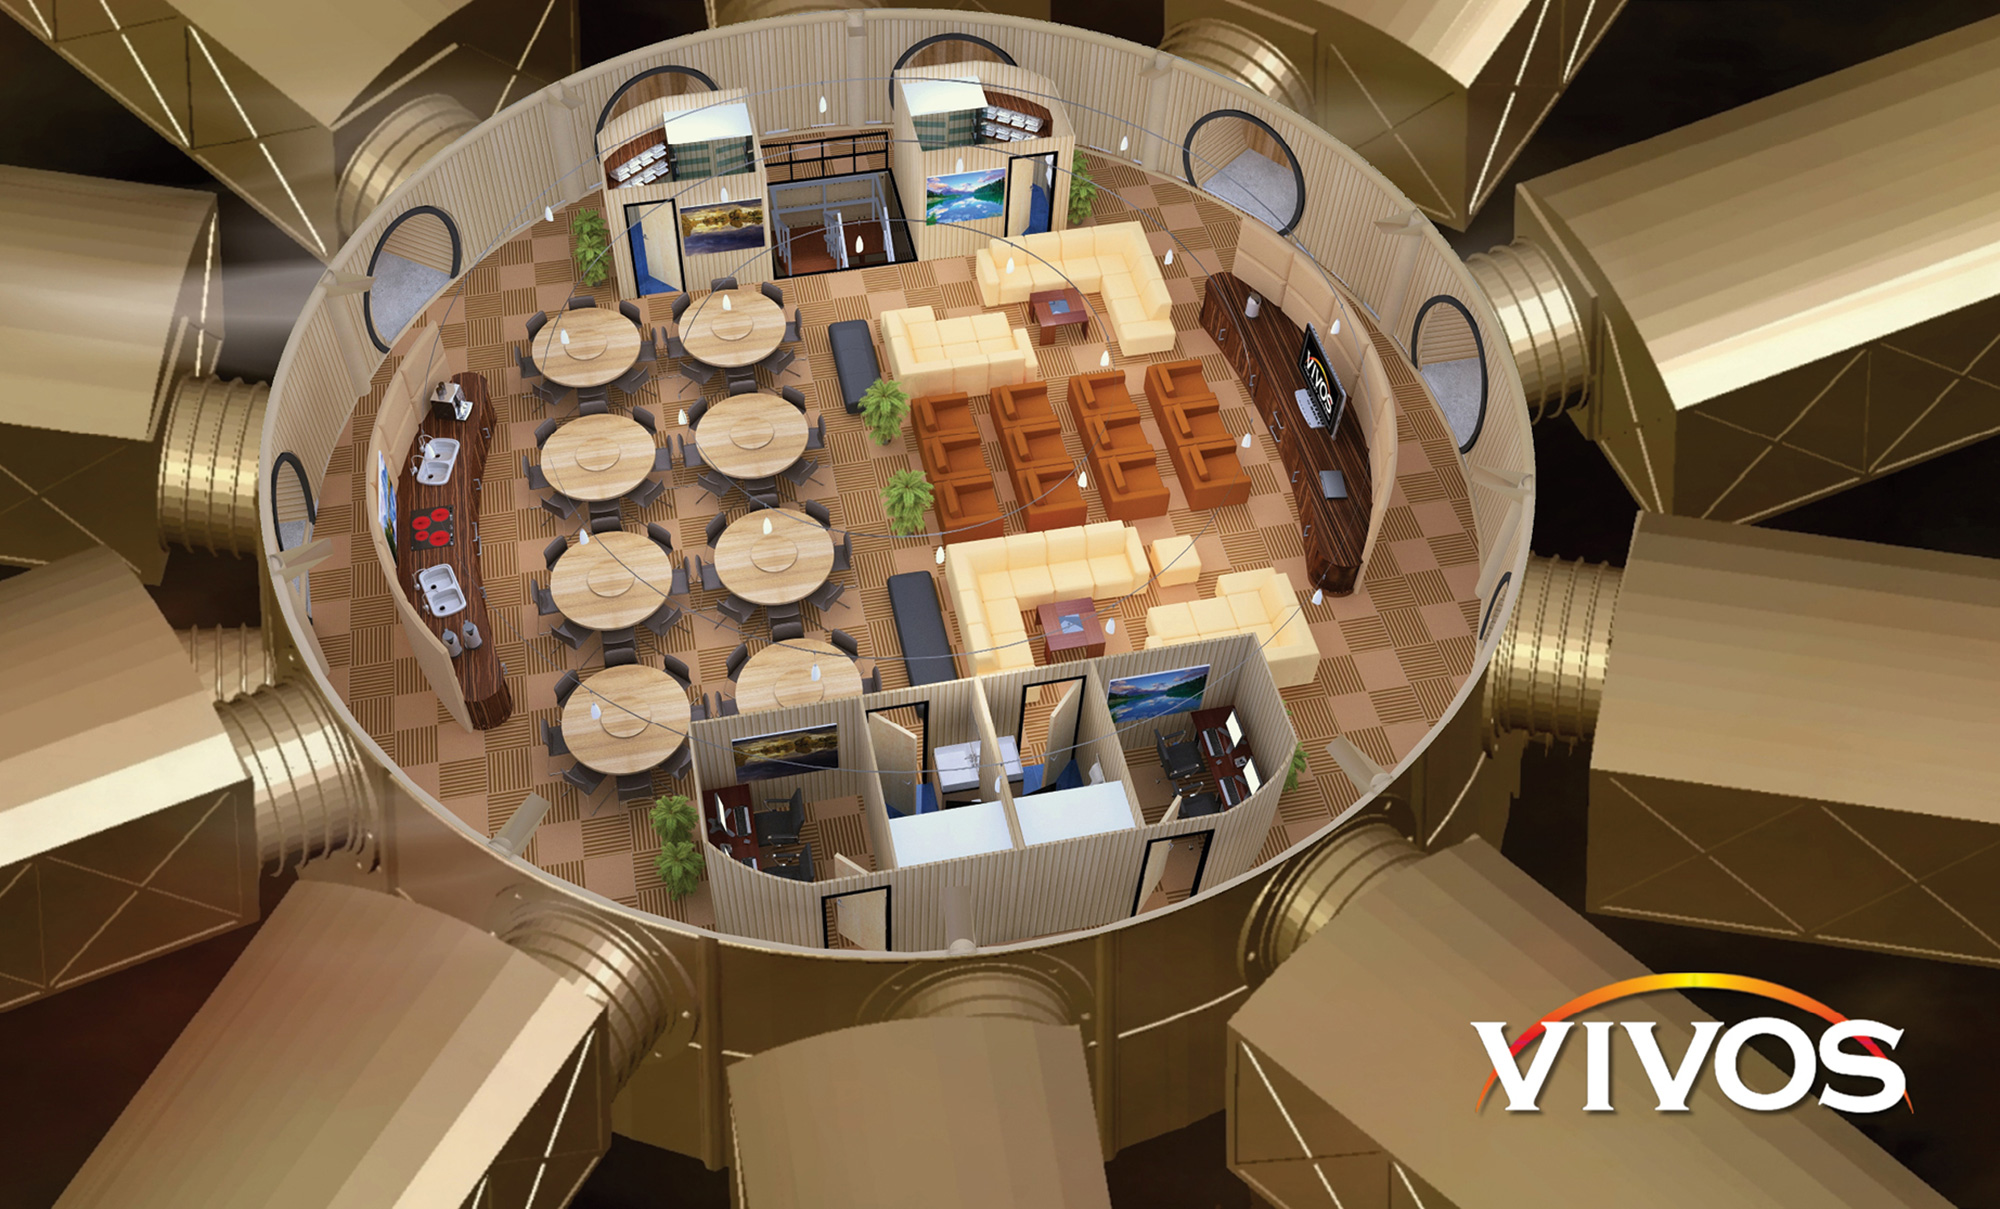 A digital rendering of a communal space in a Vivos shelter. The bunker structure contains couches, a cinema room, and dining tables.